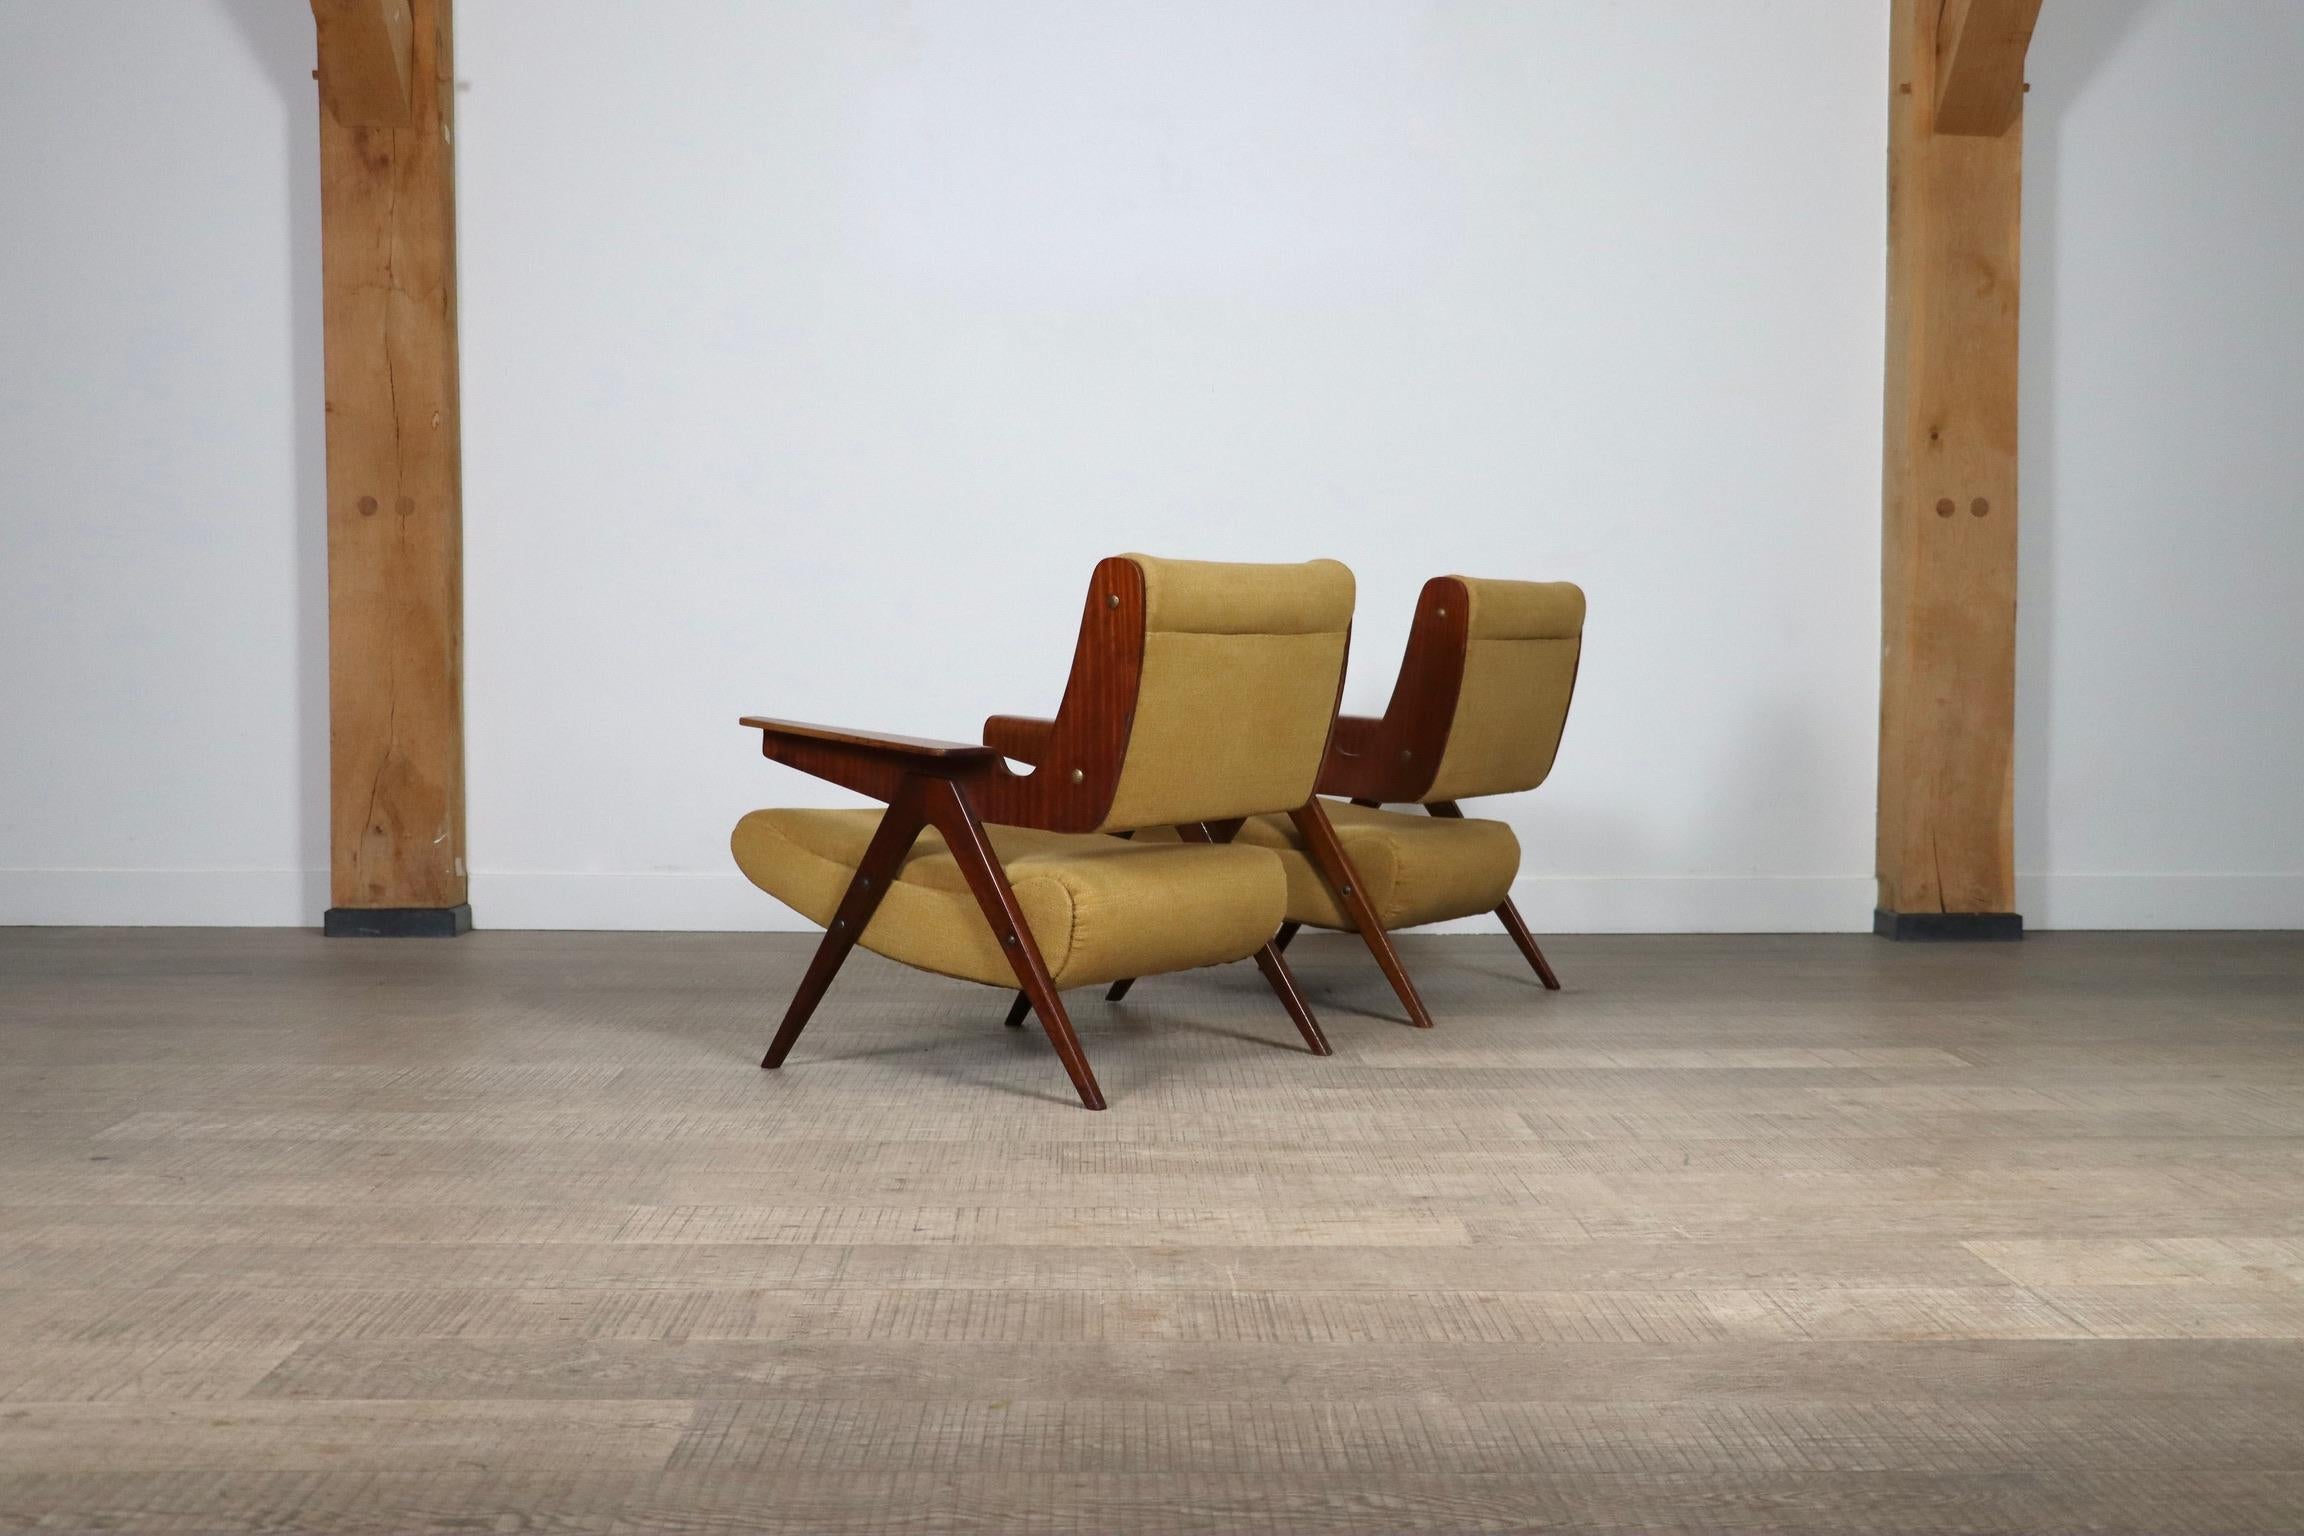 Pair Of Gianfranco Frattini Model 831 Lounge Chairs For Cassina, 1950s For Sale 8